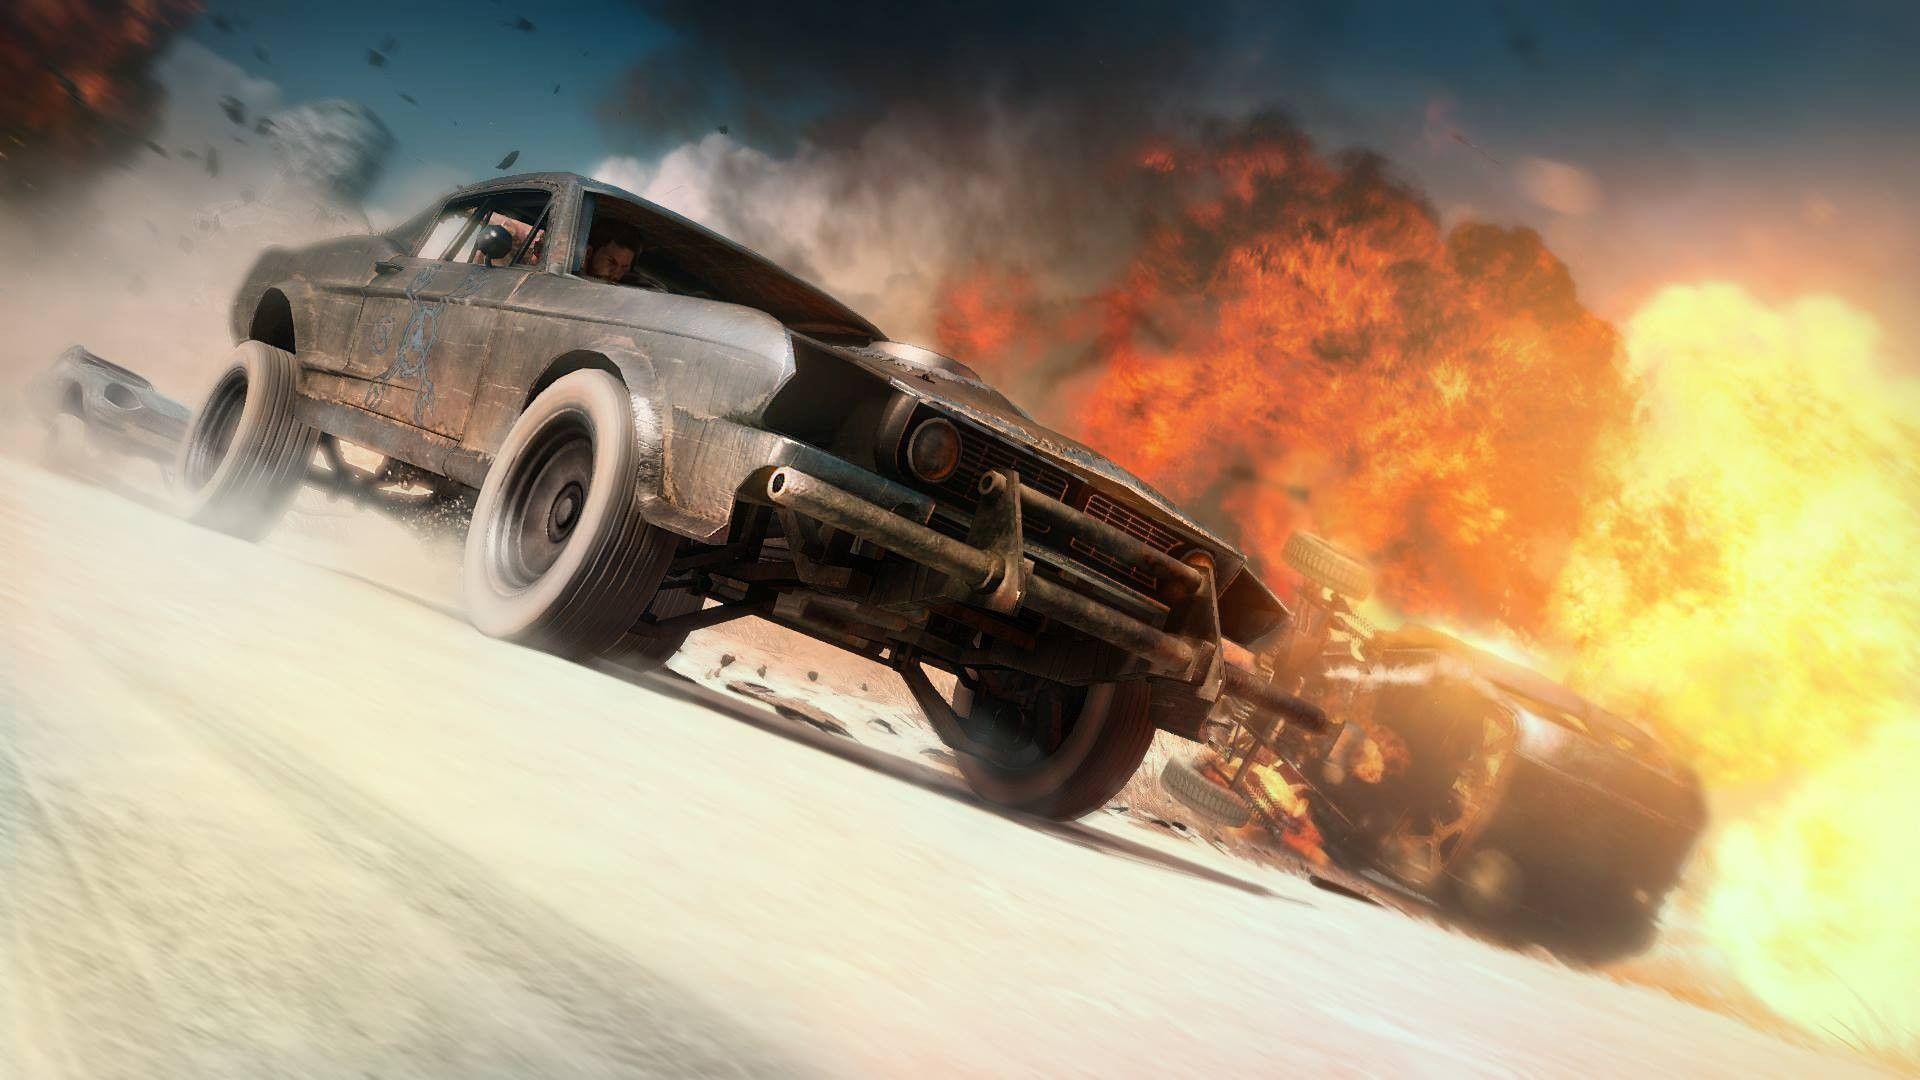 Wallpaper.wiki Mad Max Game 1920x1080 1080p PIC WPC001236